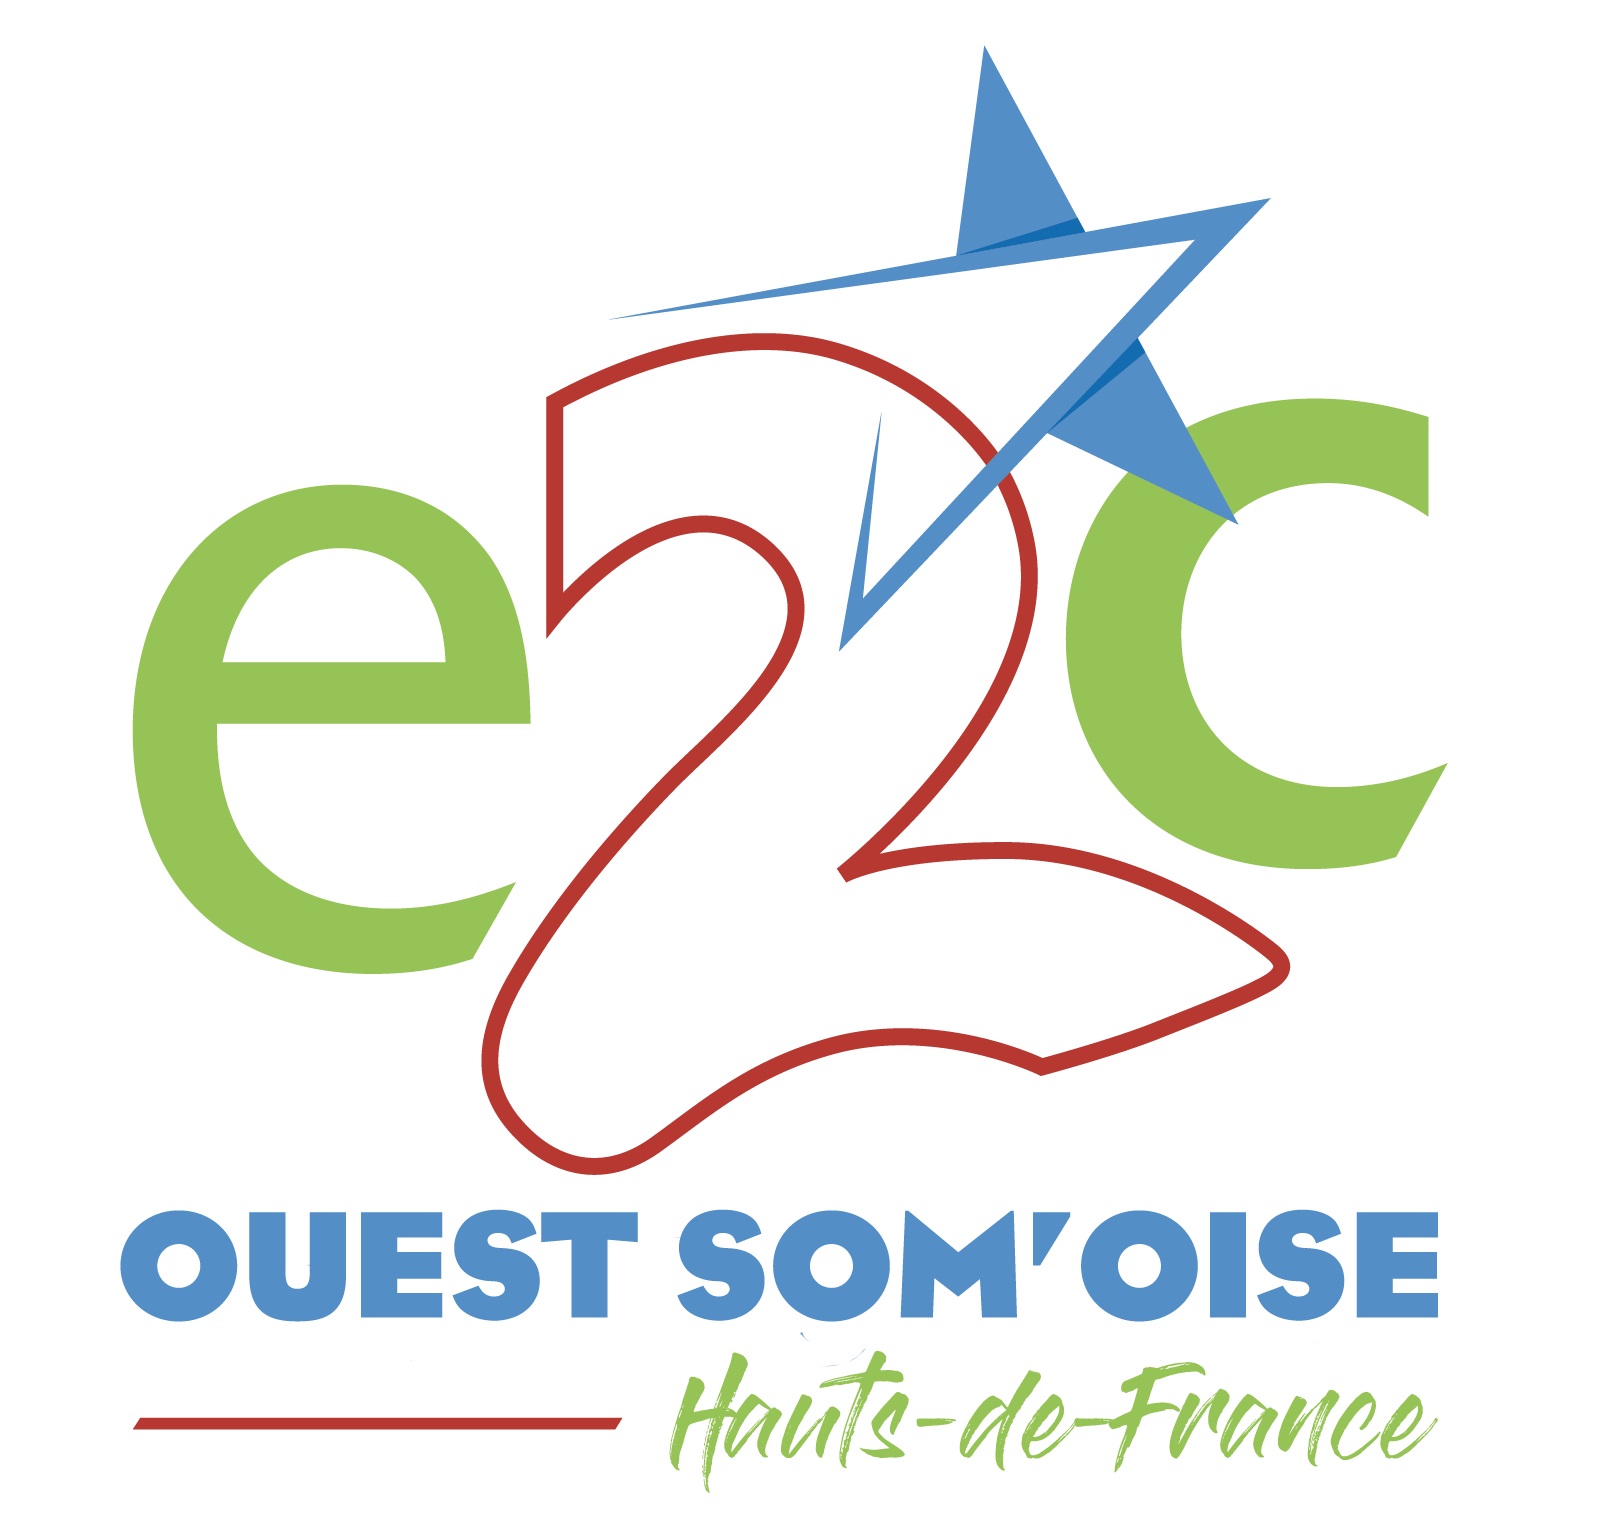 E2C Ouest Somme